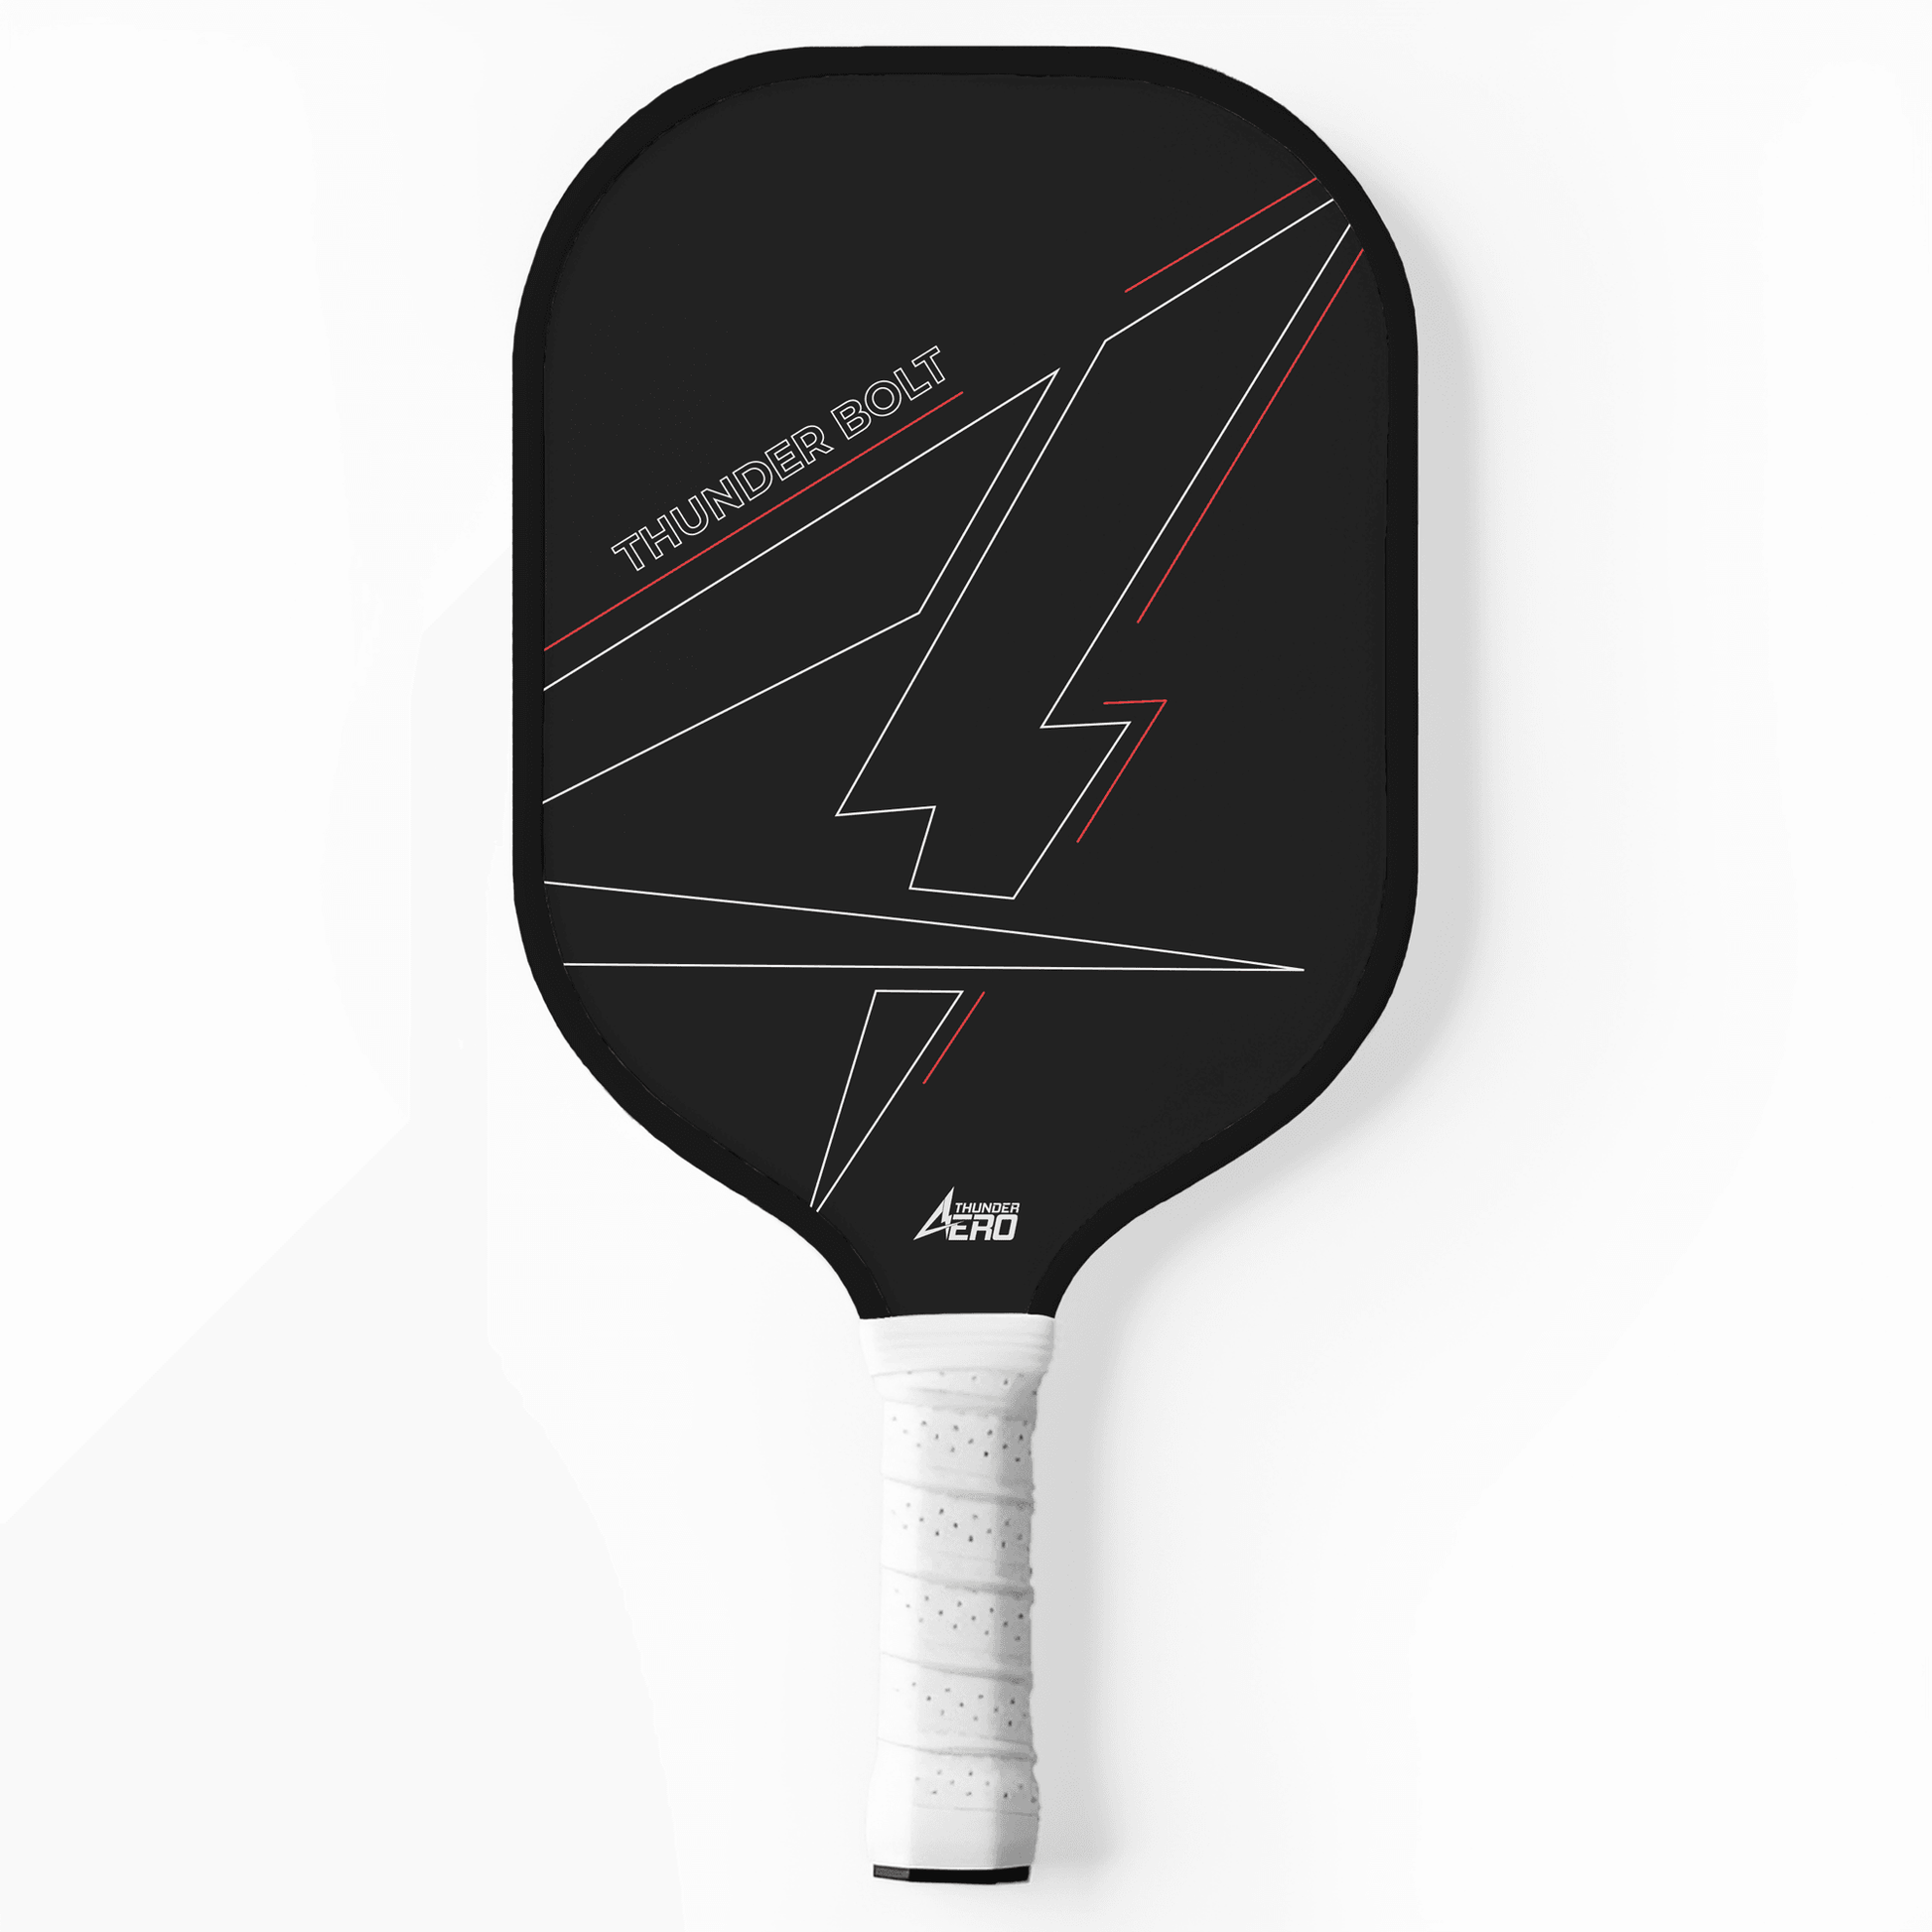 Epic drive Edition Best Professional Pickleball Paddle Brand AT-2001 Red - Aero Thunder